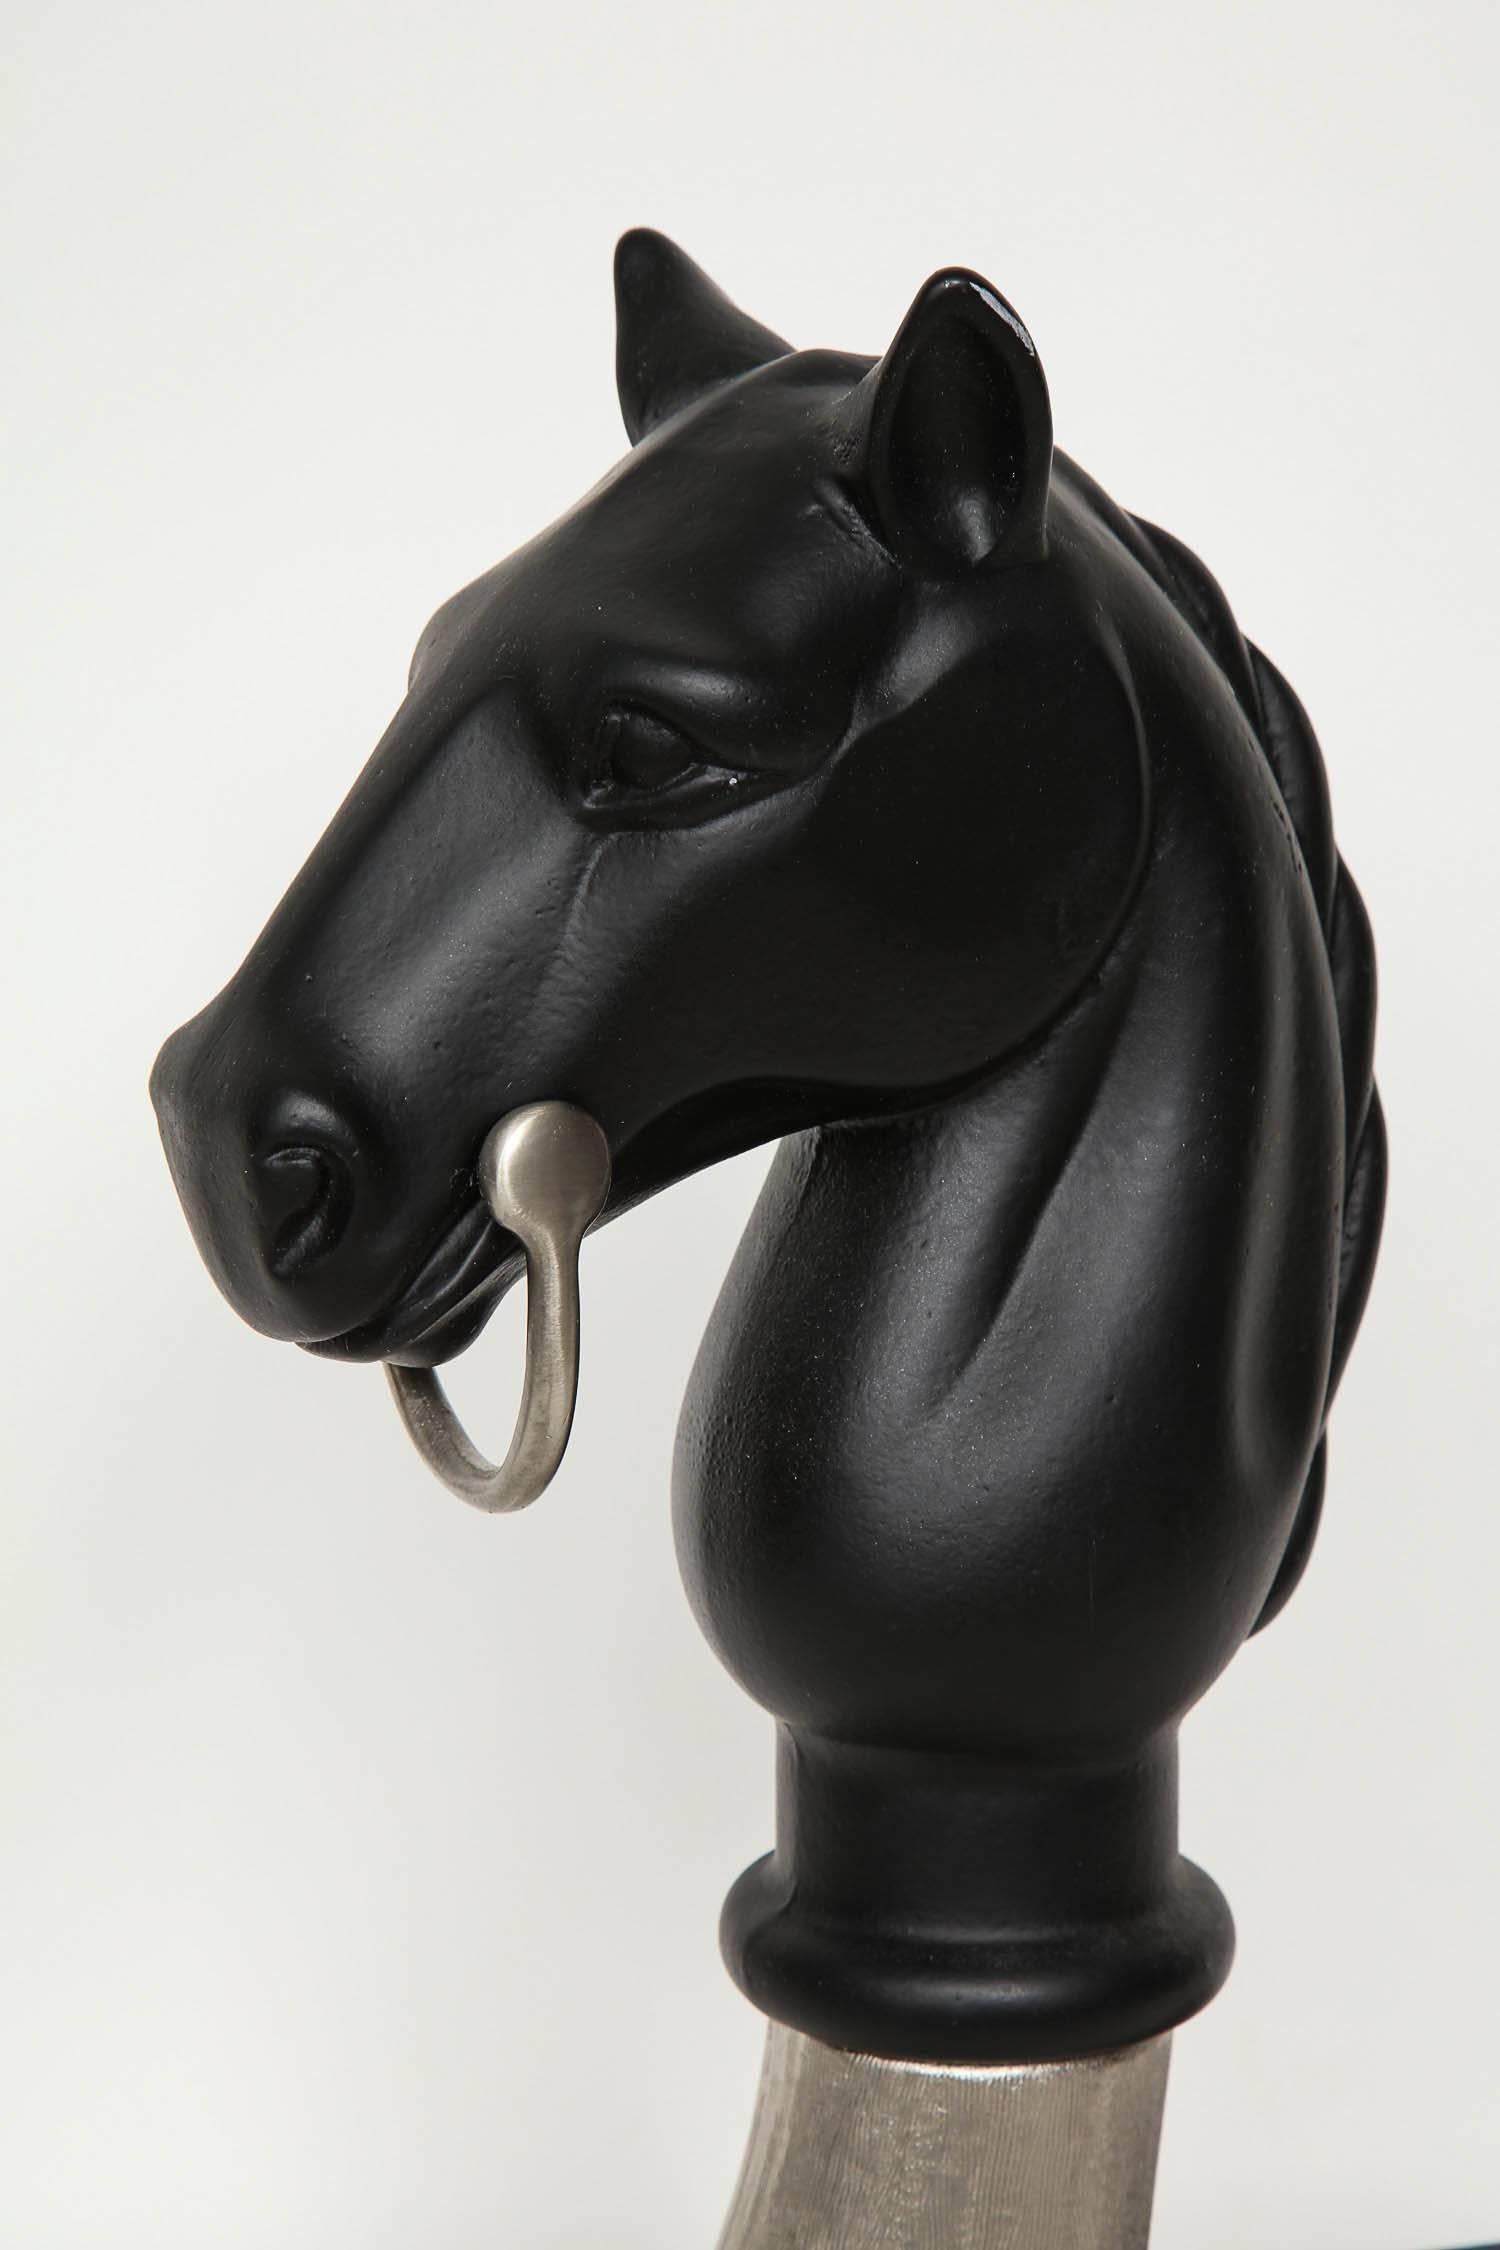 20th Century Neoclassical Equestrian Andirons